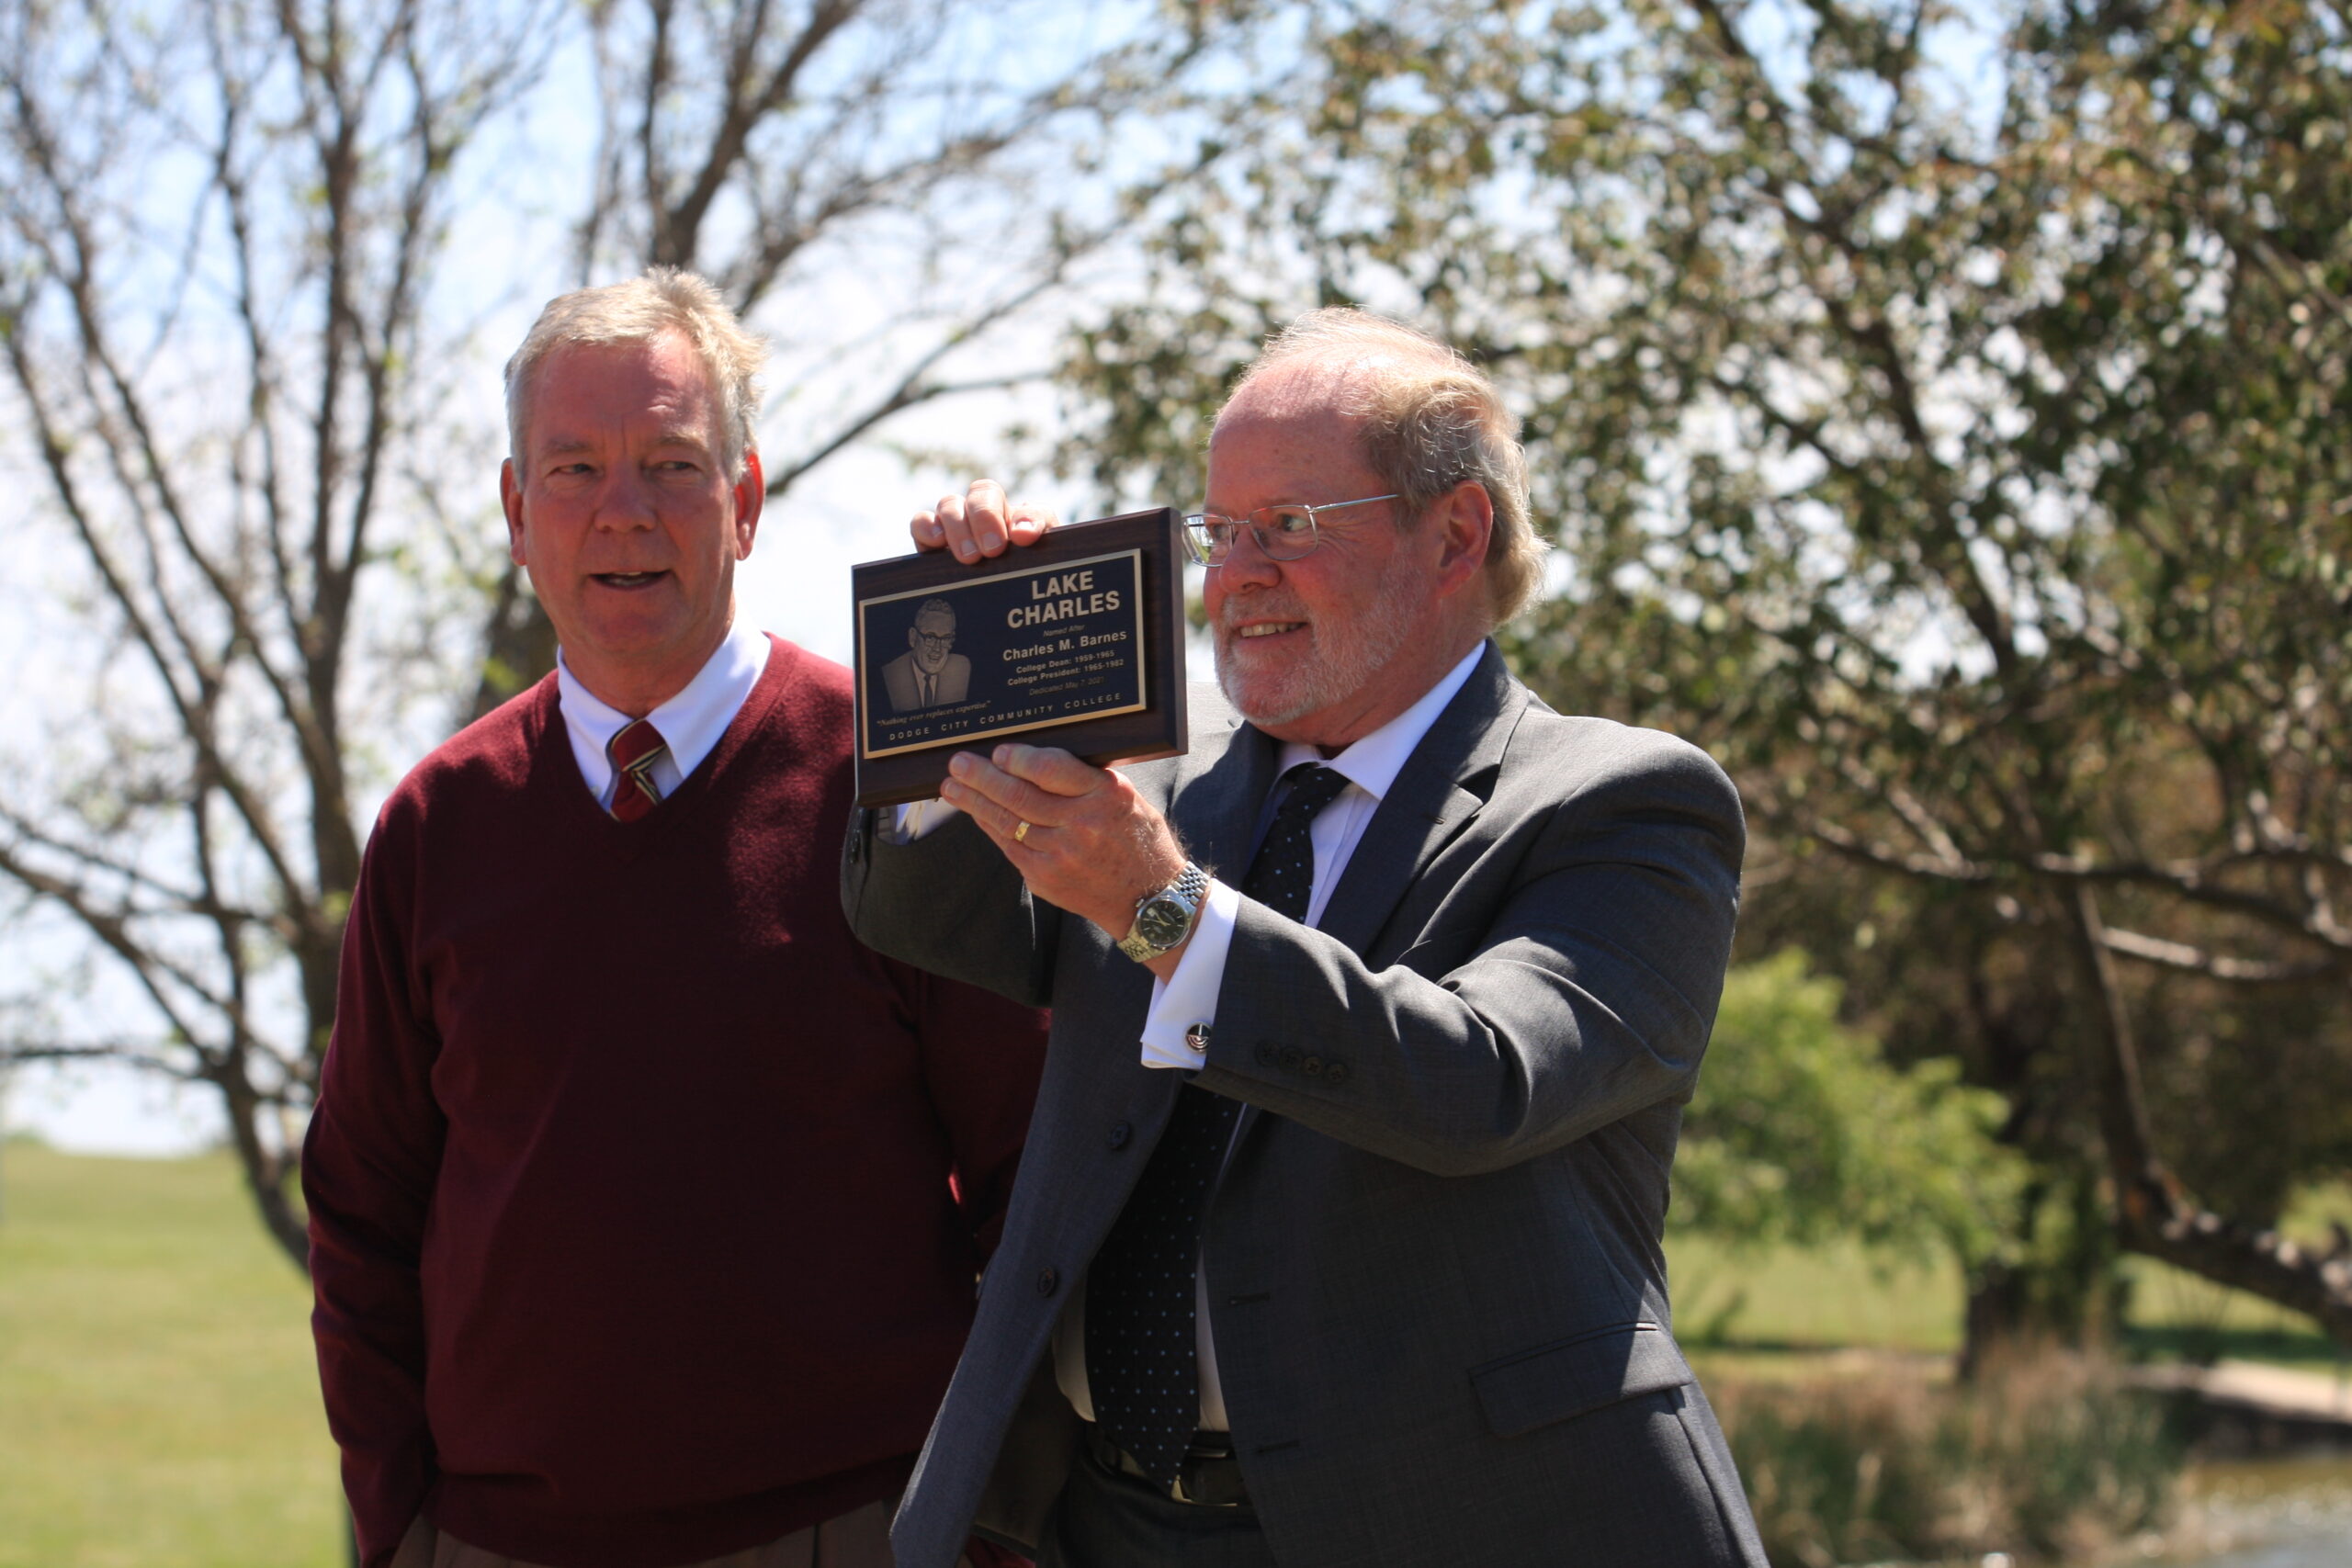 Dr. Harold Nolte, DC3 President (left), presents Dr. Roger Barnes with a replica of the bronze plaque unveiled at the Lake Charles dedication on May 7. [Photo by Justin Wilson]